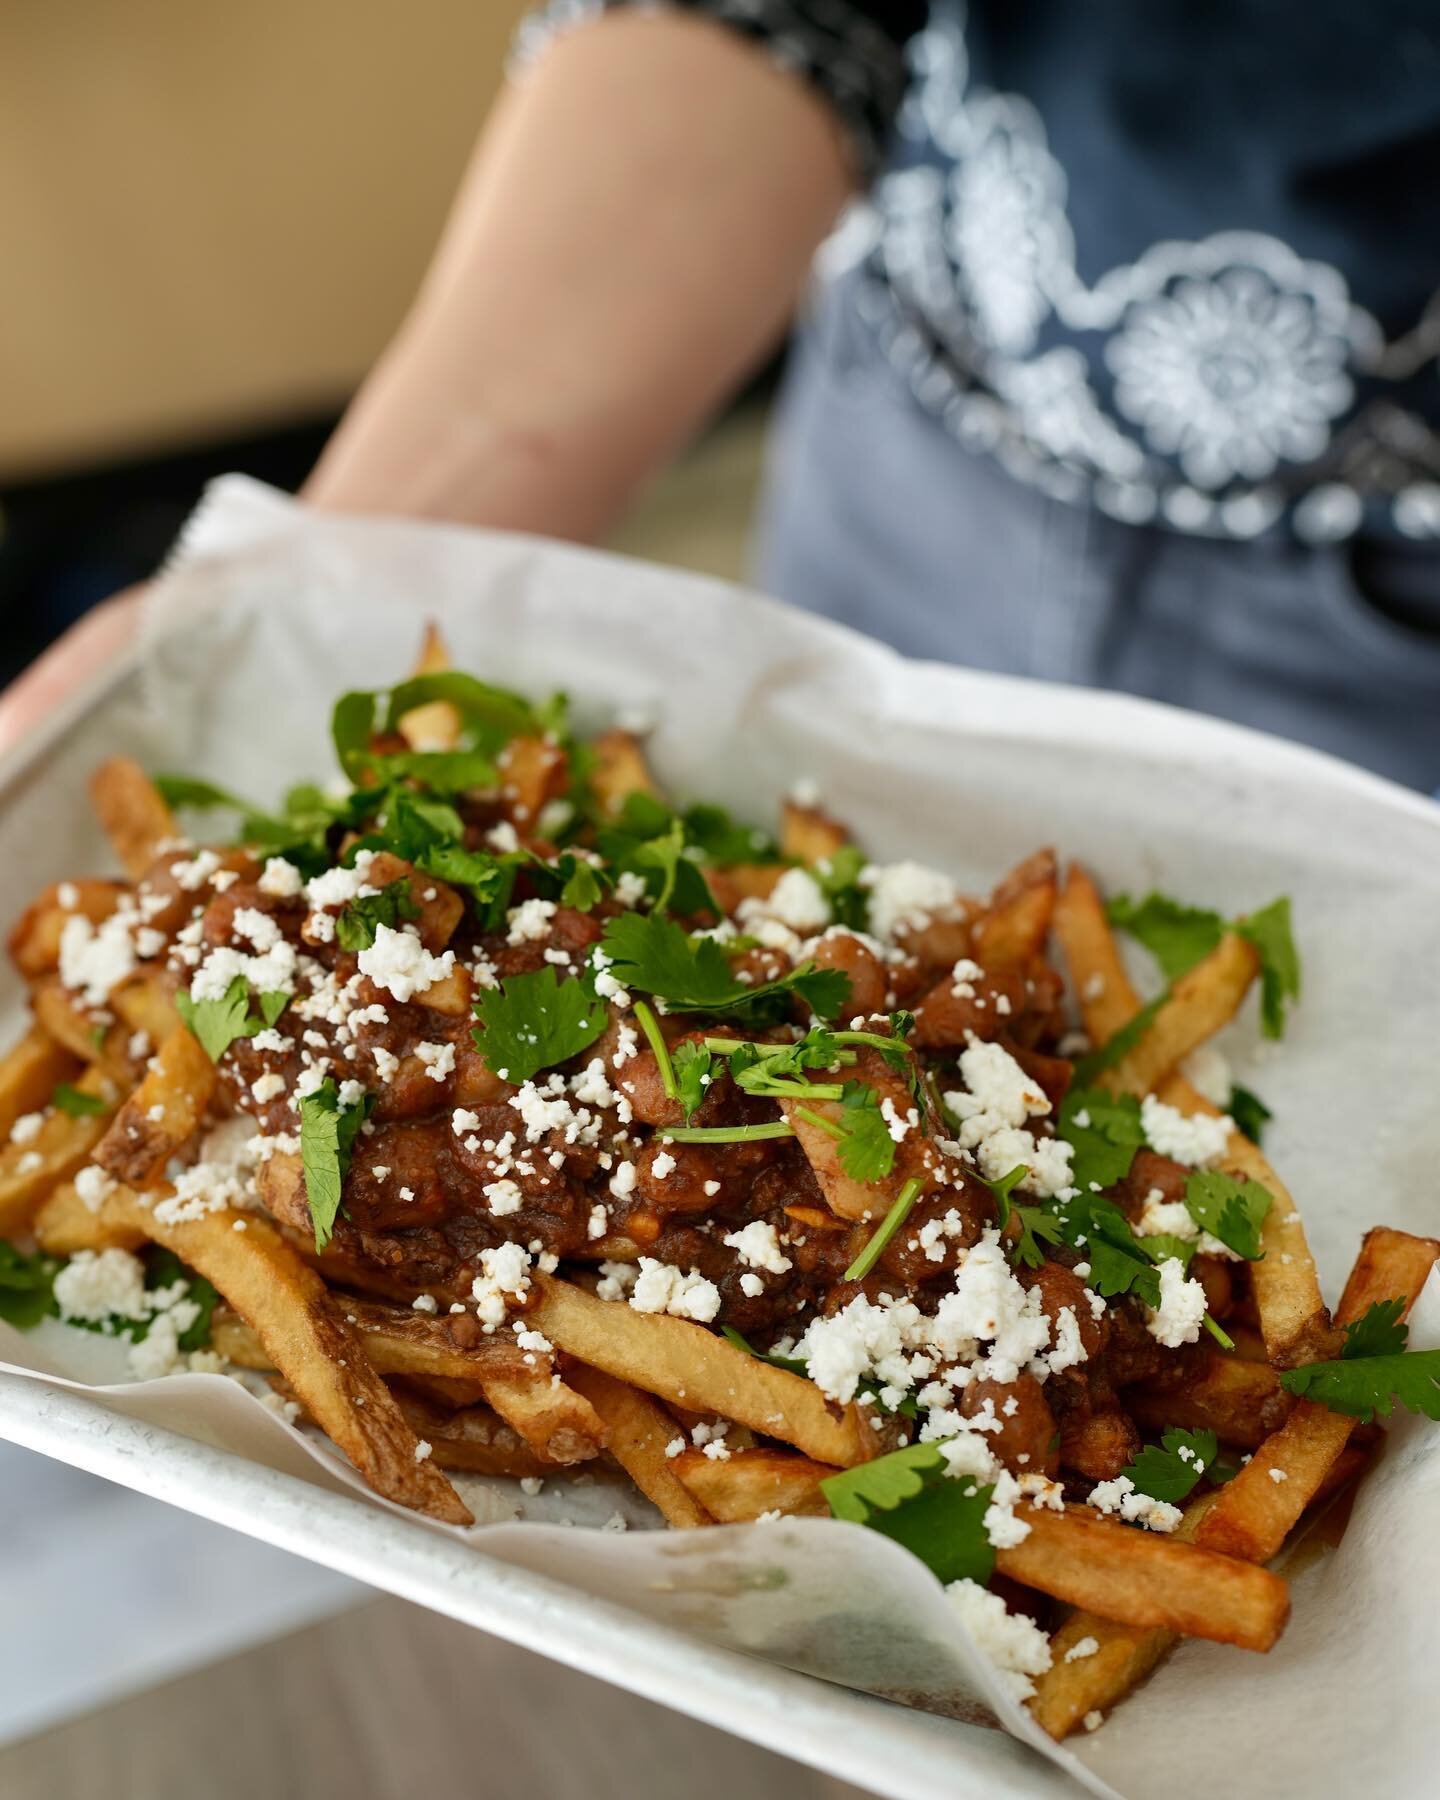 Lamb Chili Lovers, WE HEARD YOU!🌶️ We weren&rsquo;t about to let you miss out, so we&rsquo;ve whipped up a fresh batch!  Come grab a bowl, a plate of chili fries or stuffed malawach (or two) while it lasts!  This crowd-pleaser won&rsquo;t stick arou